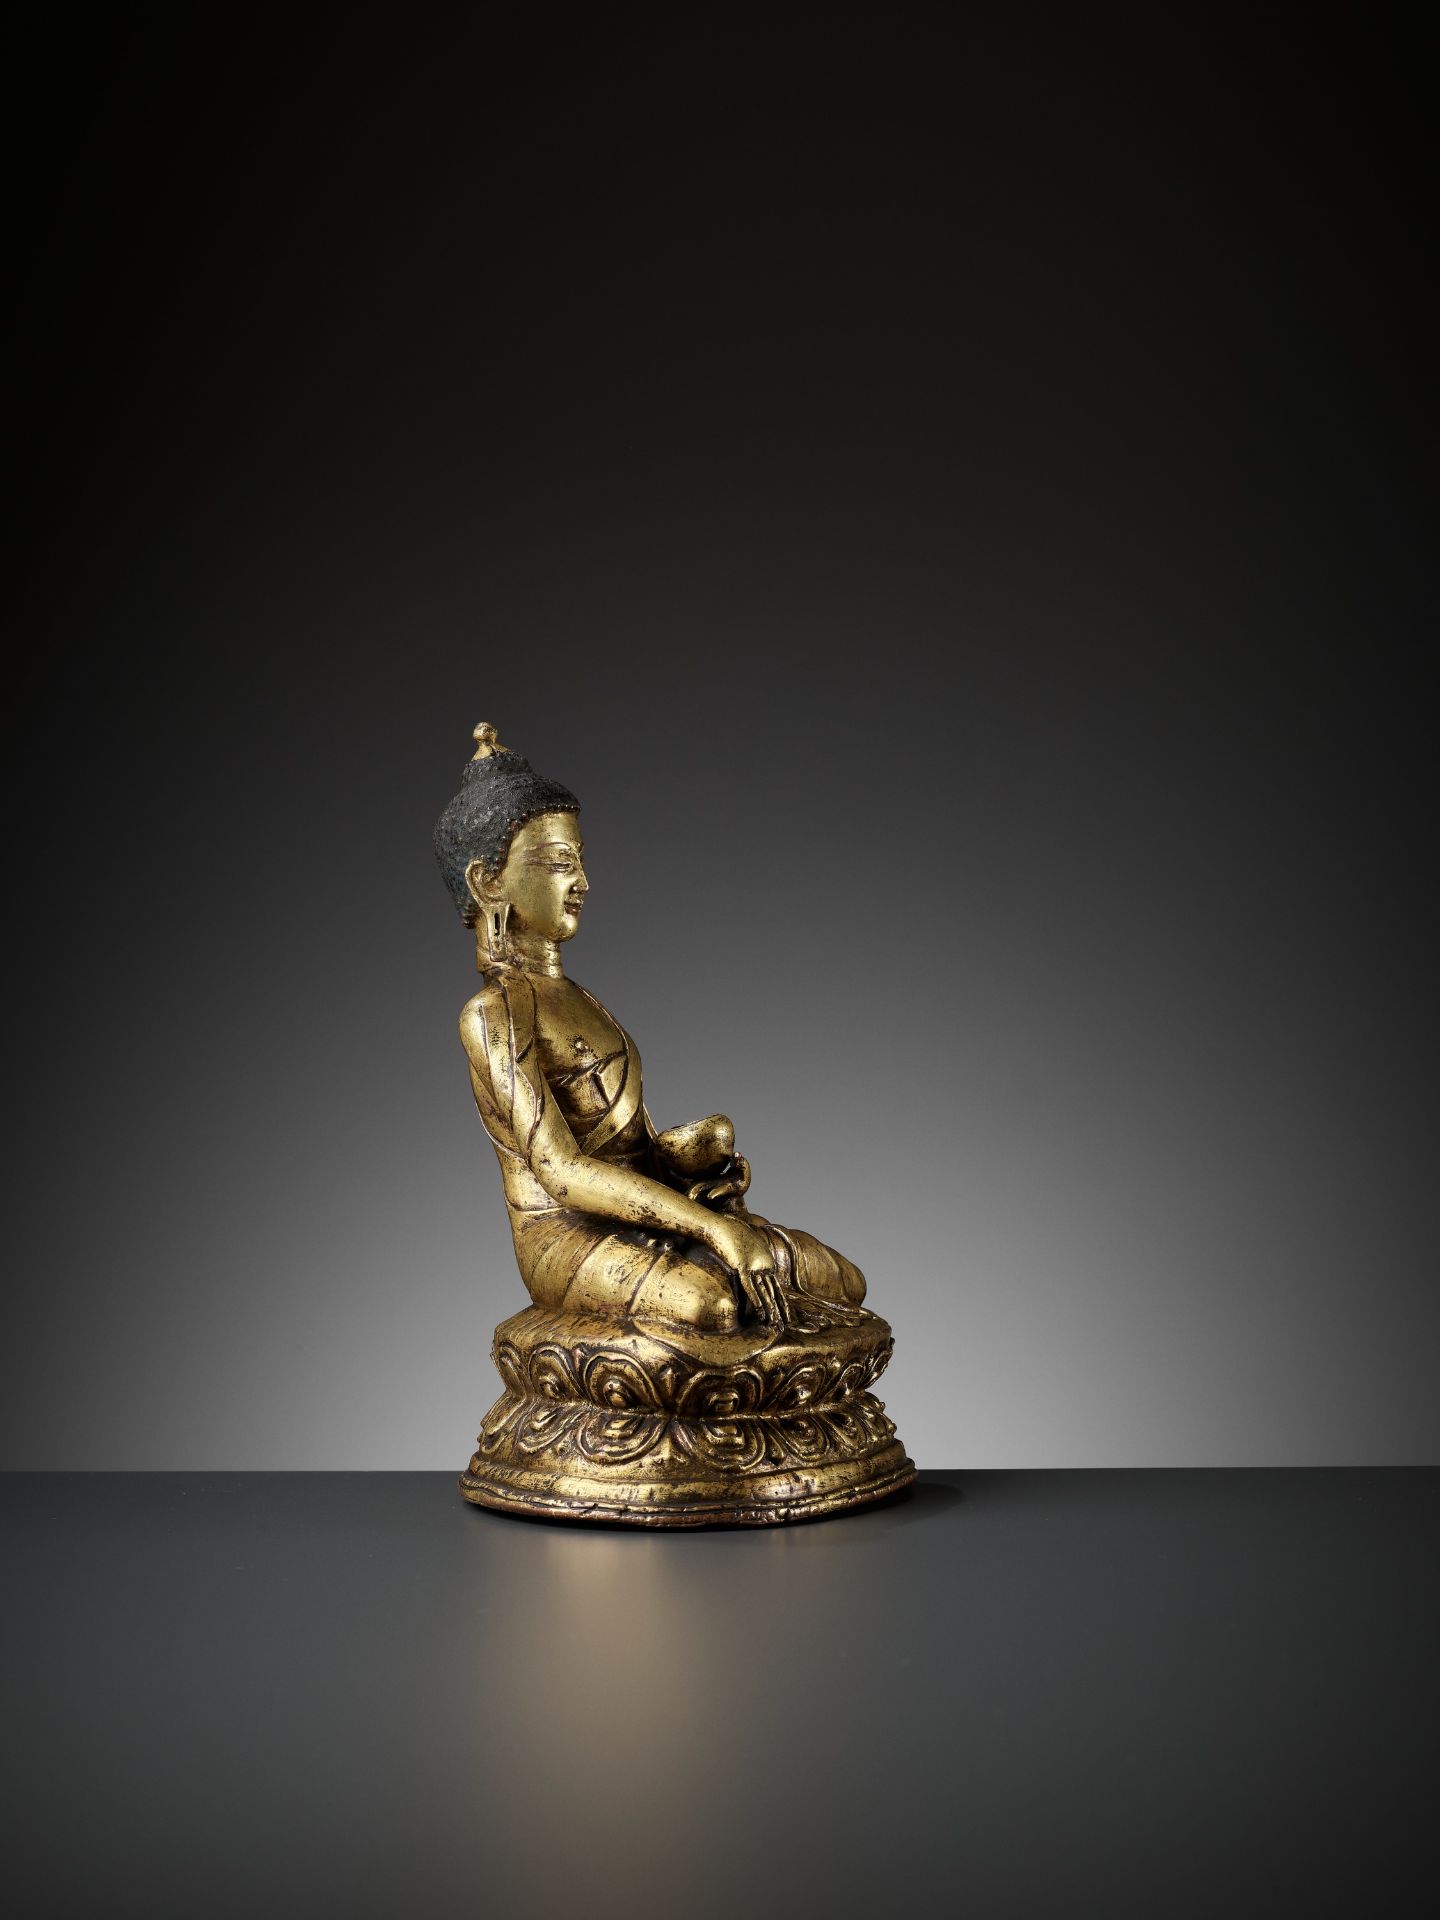 A GILT COPPER ALLOY FIGURE OF BUDDHA, 11TH-12TH CENTURY - Image 9 of 17